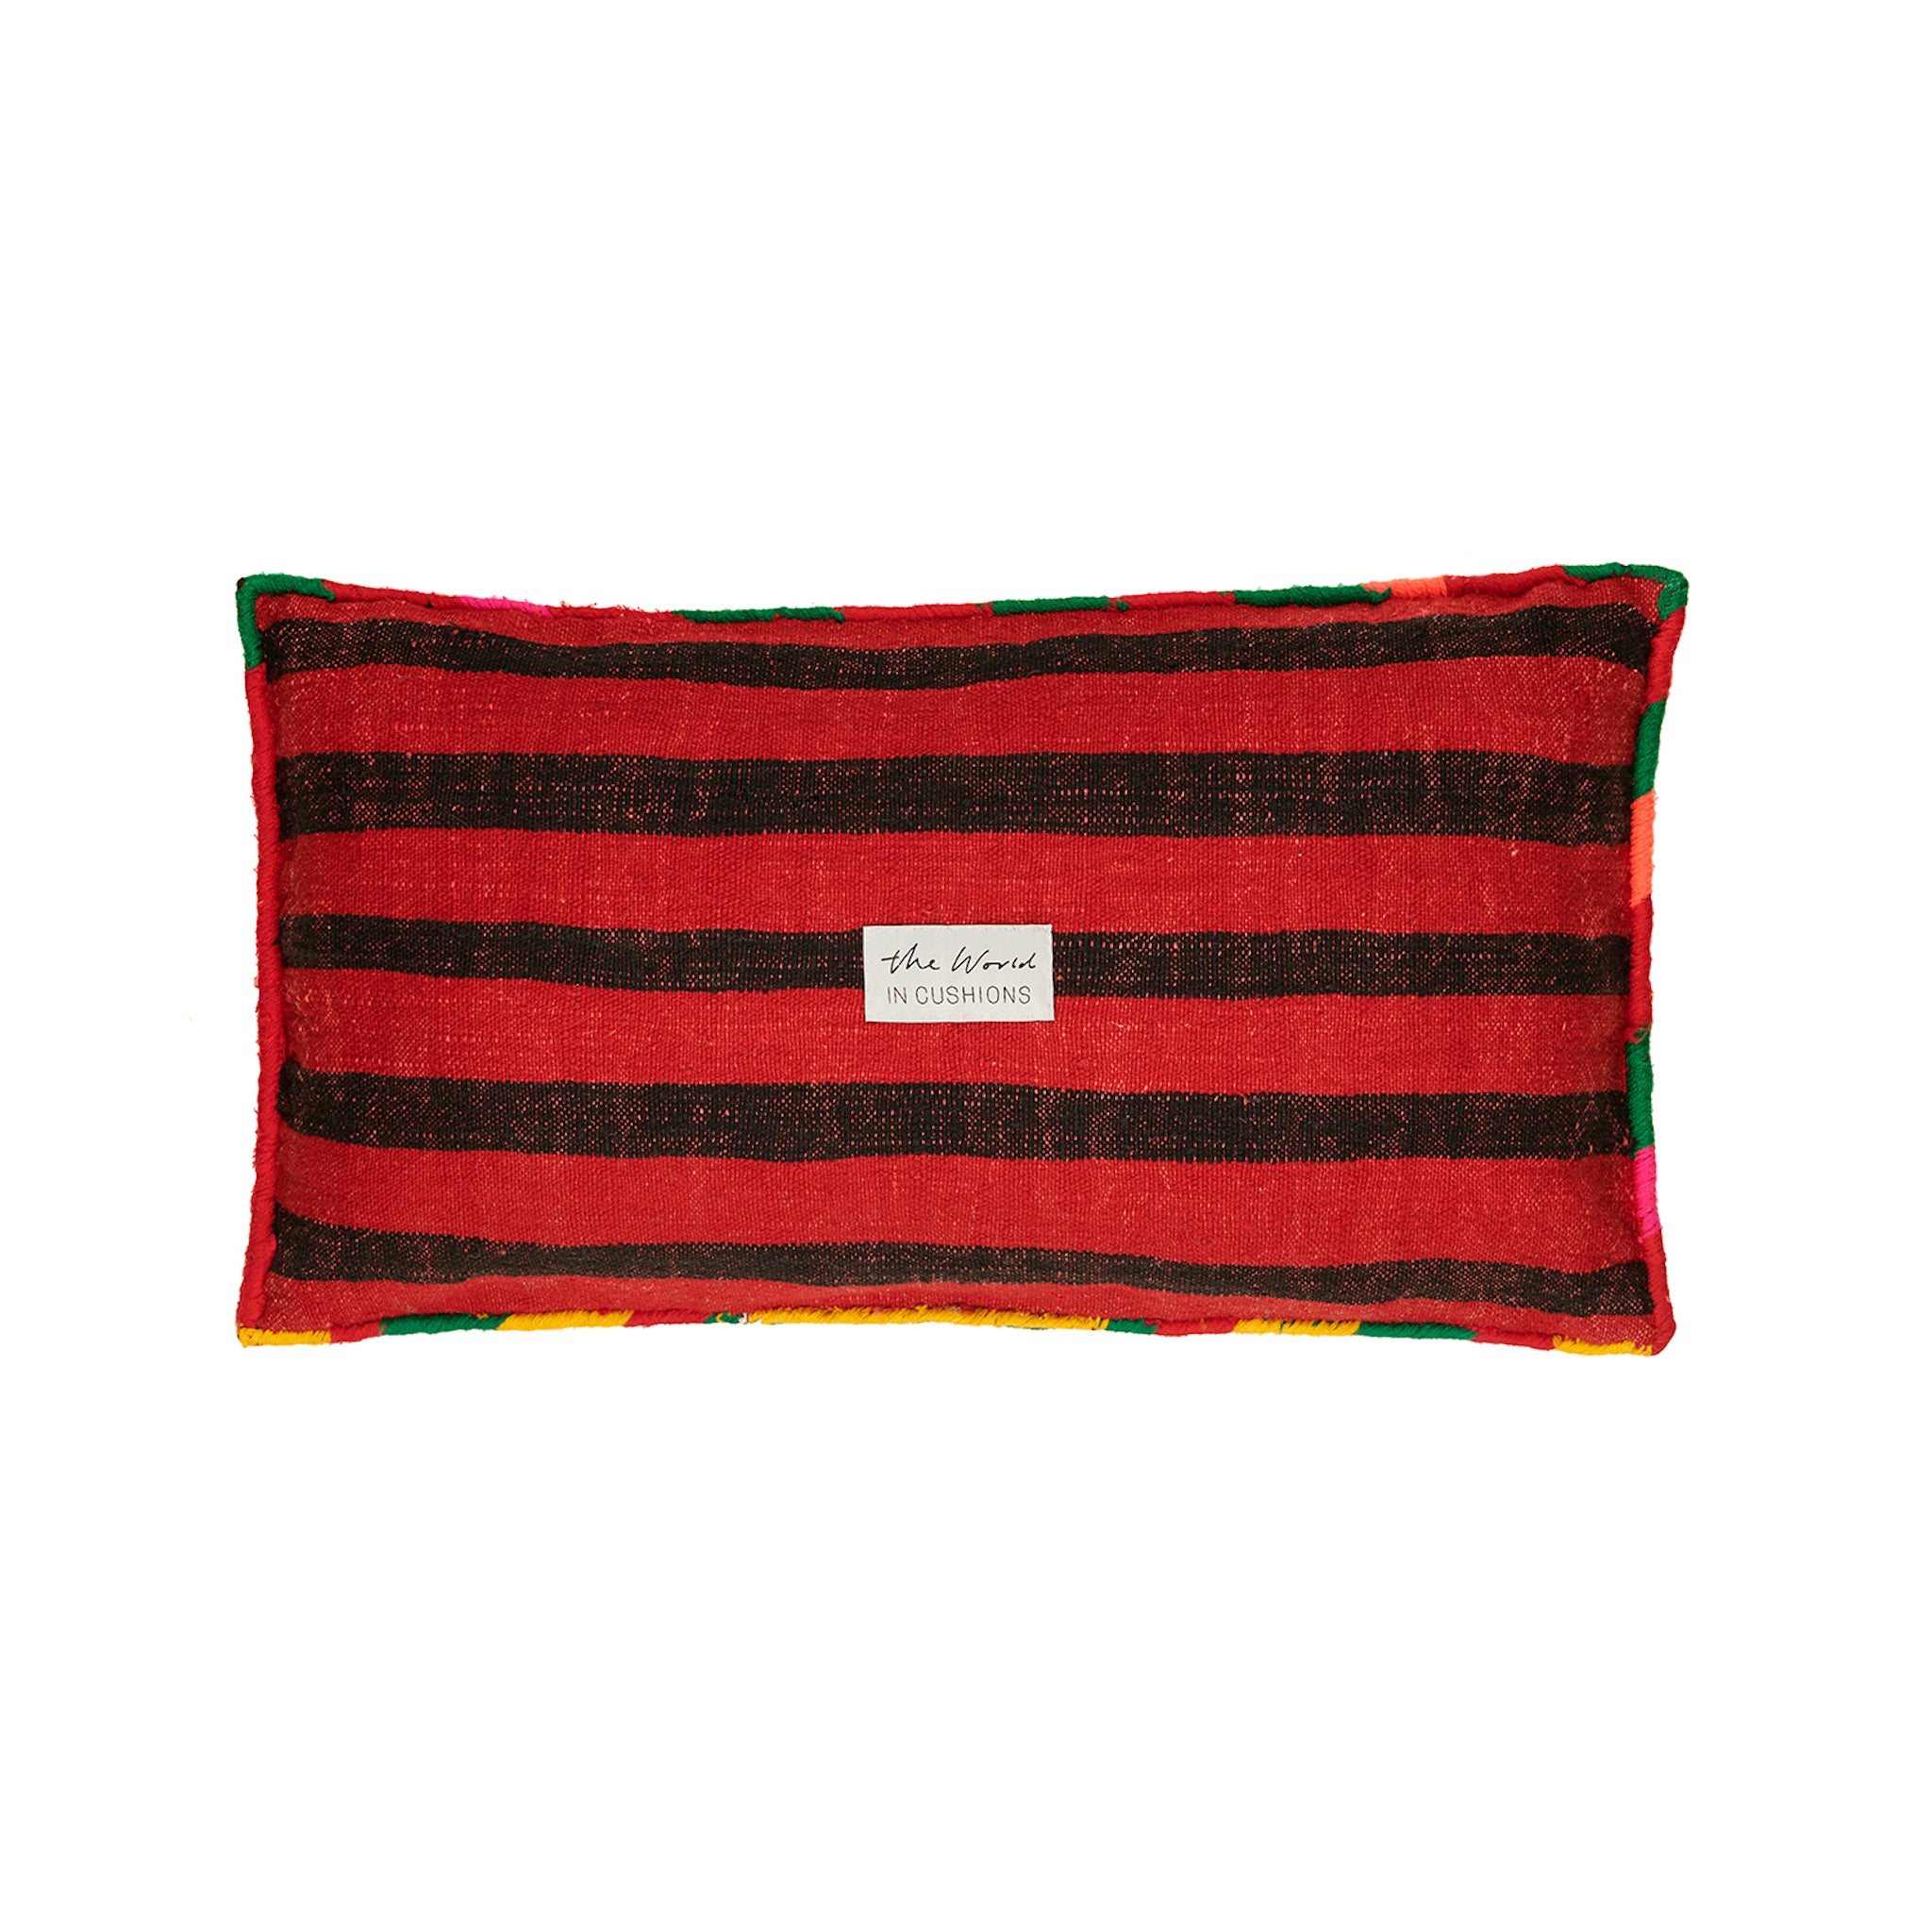 Red and Black Striped Hand Woven Kilim Scatter Rectangle Cushion from Morocco - BACK